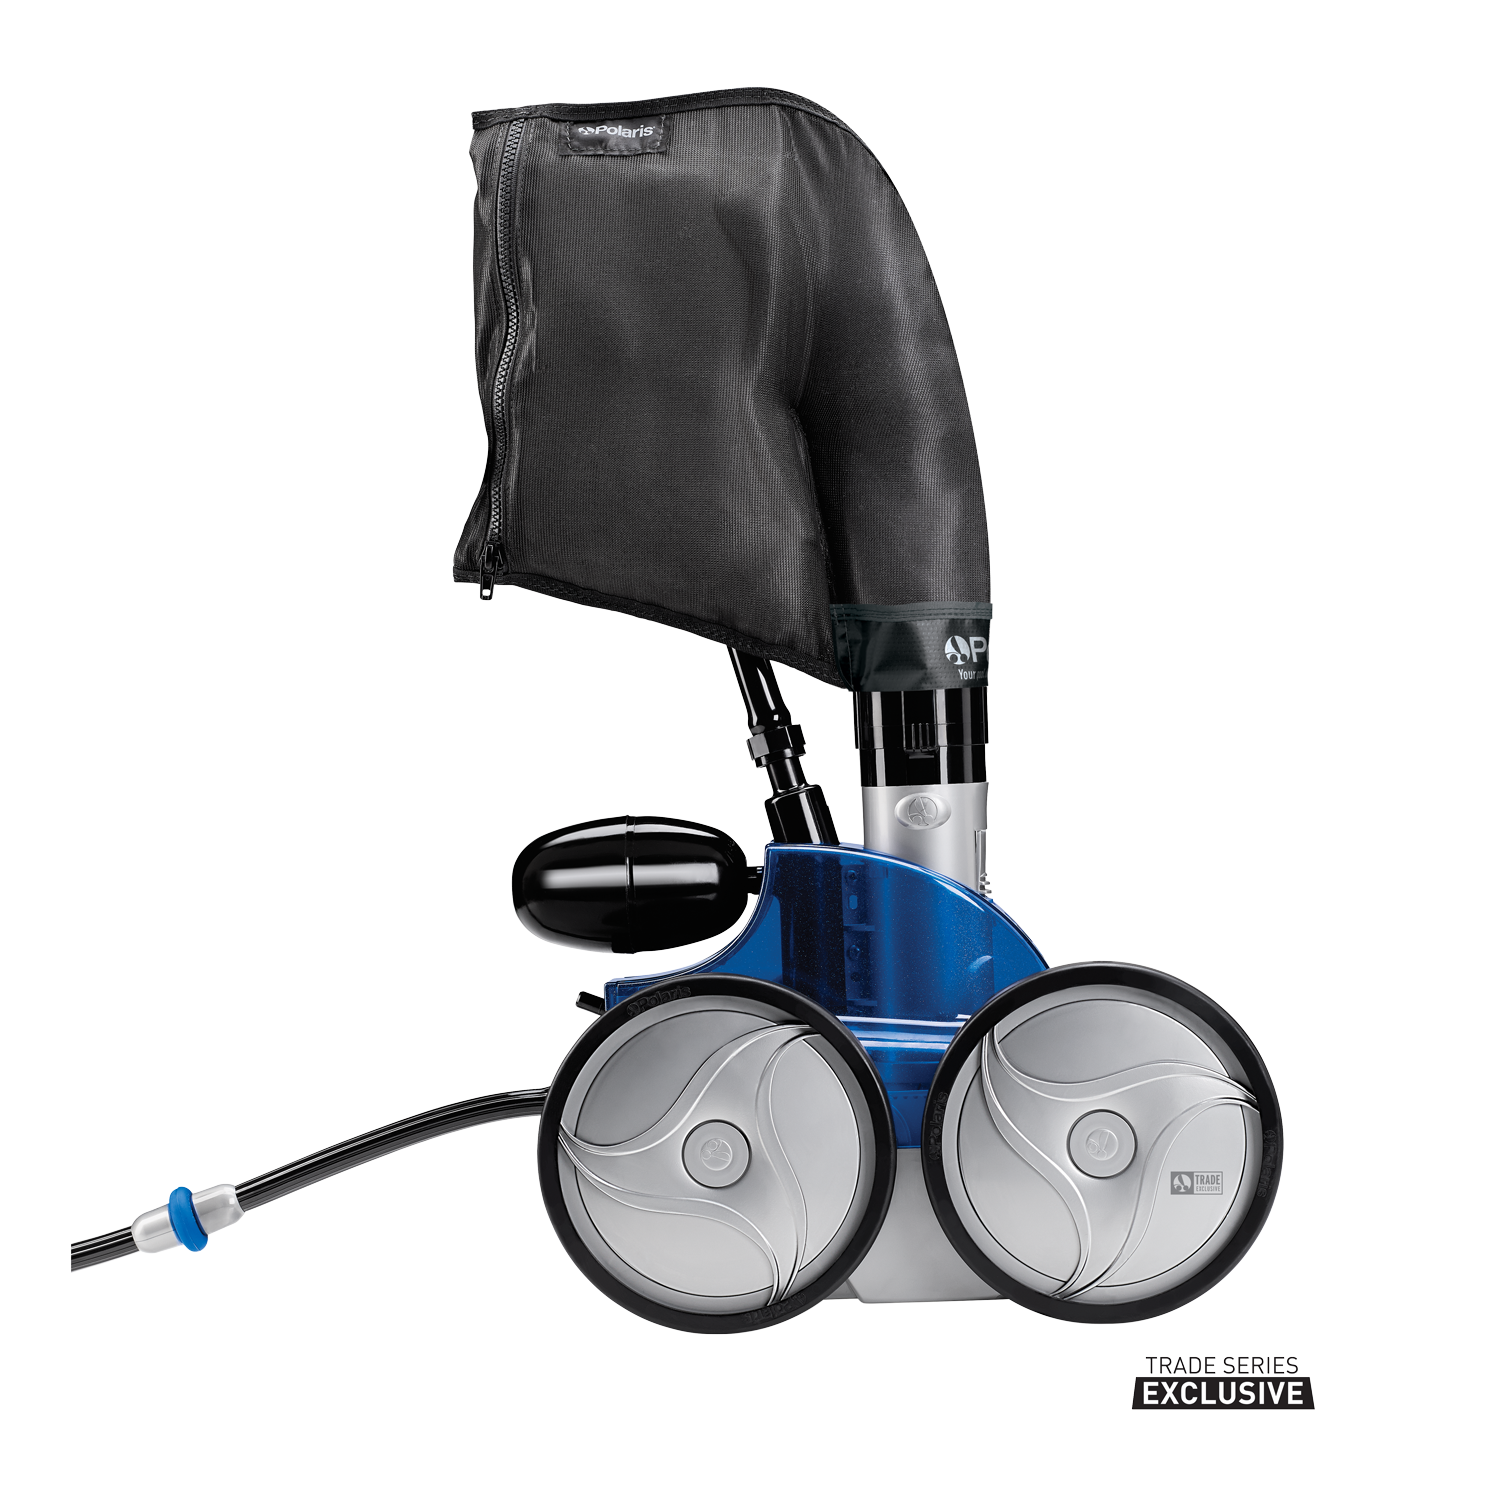 polaris-tr35p-1-swimming-pool-cleaner-worldwide-polaris-automatic-pool-cleaners